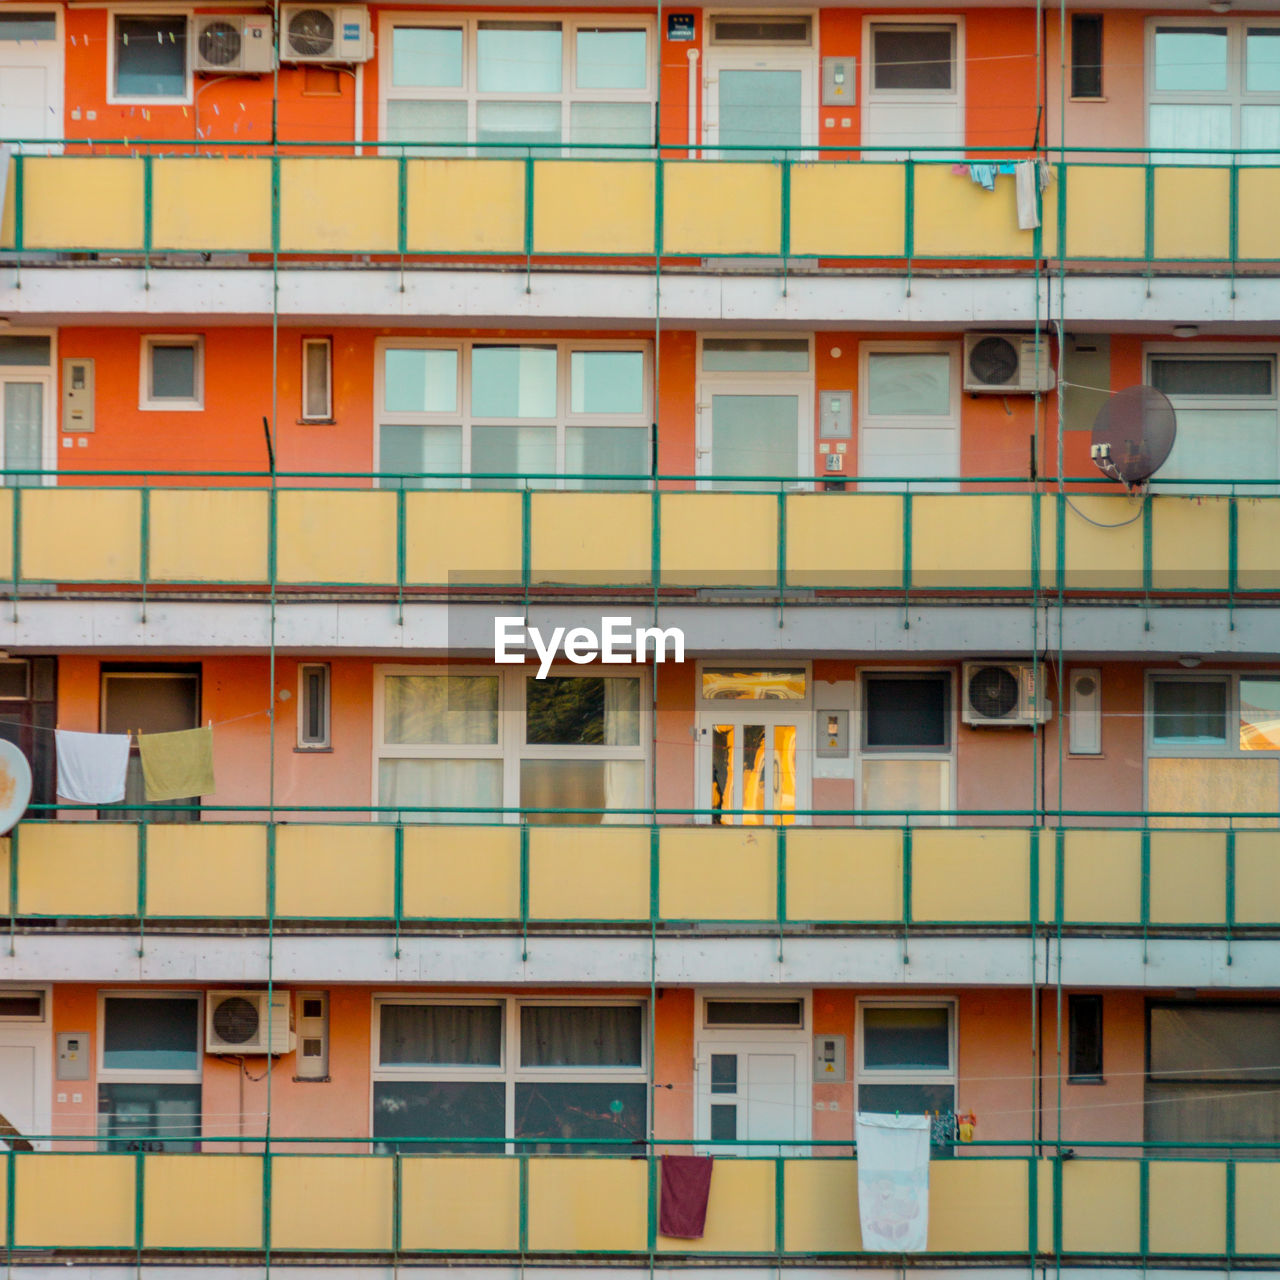 Facade of a building with orange and green balcony